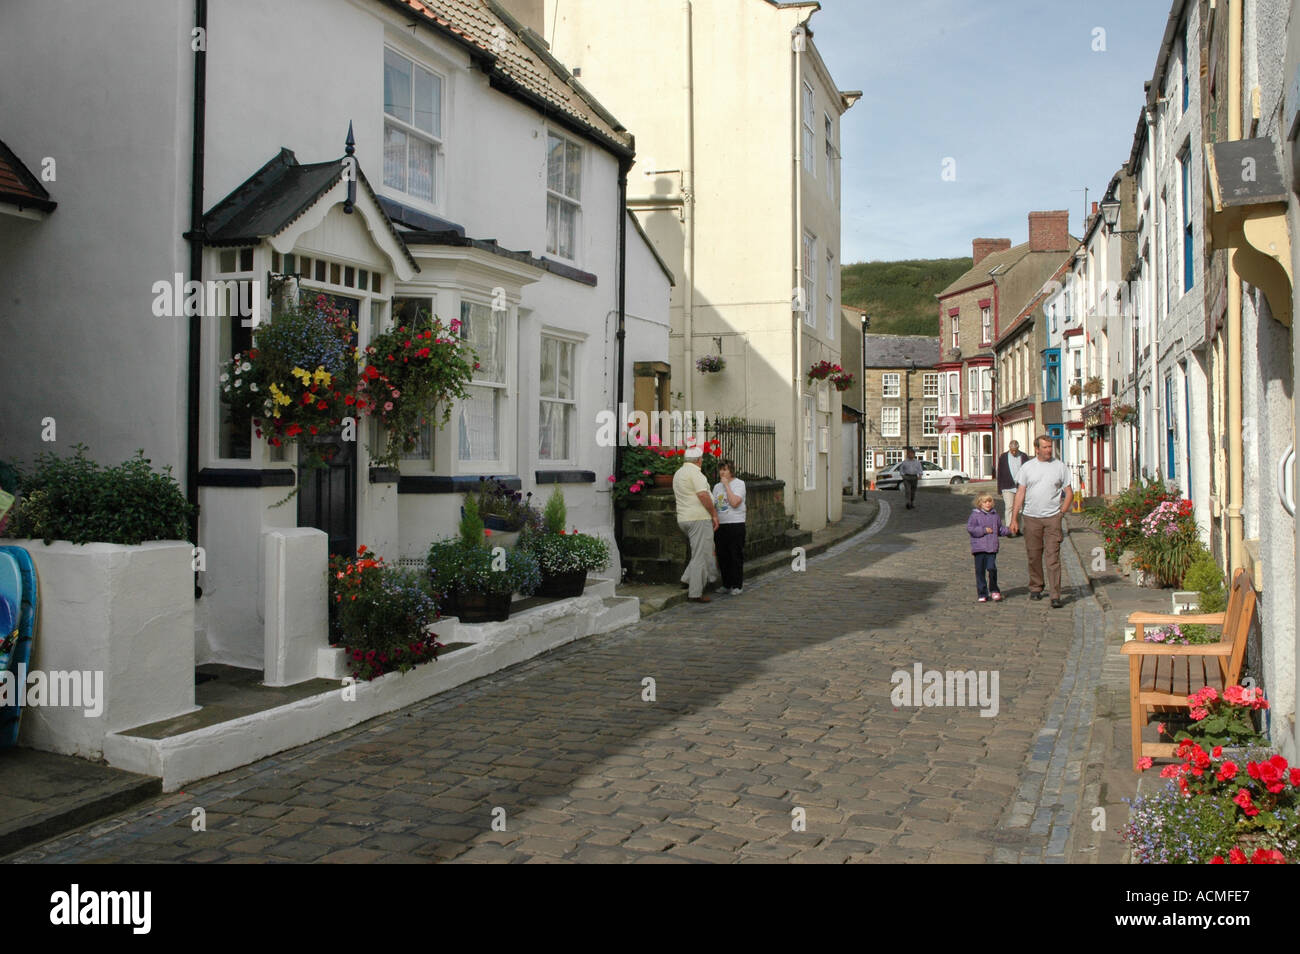 Staithes East Yorkshire Coast Angleterre Banque D'Images